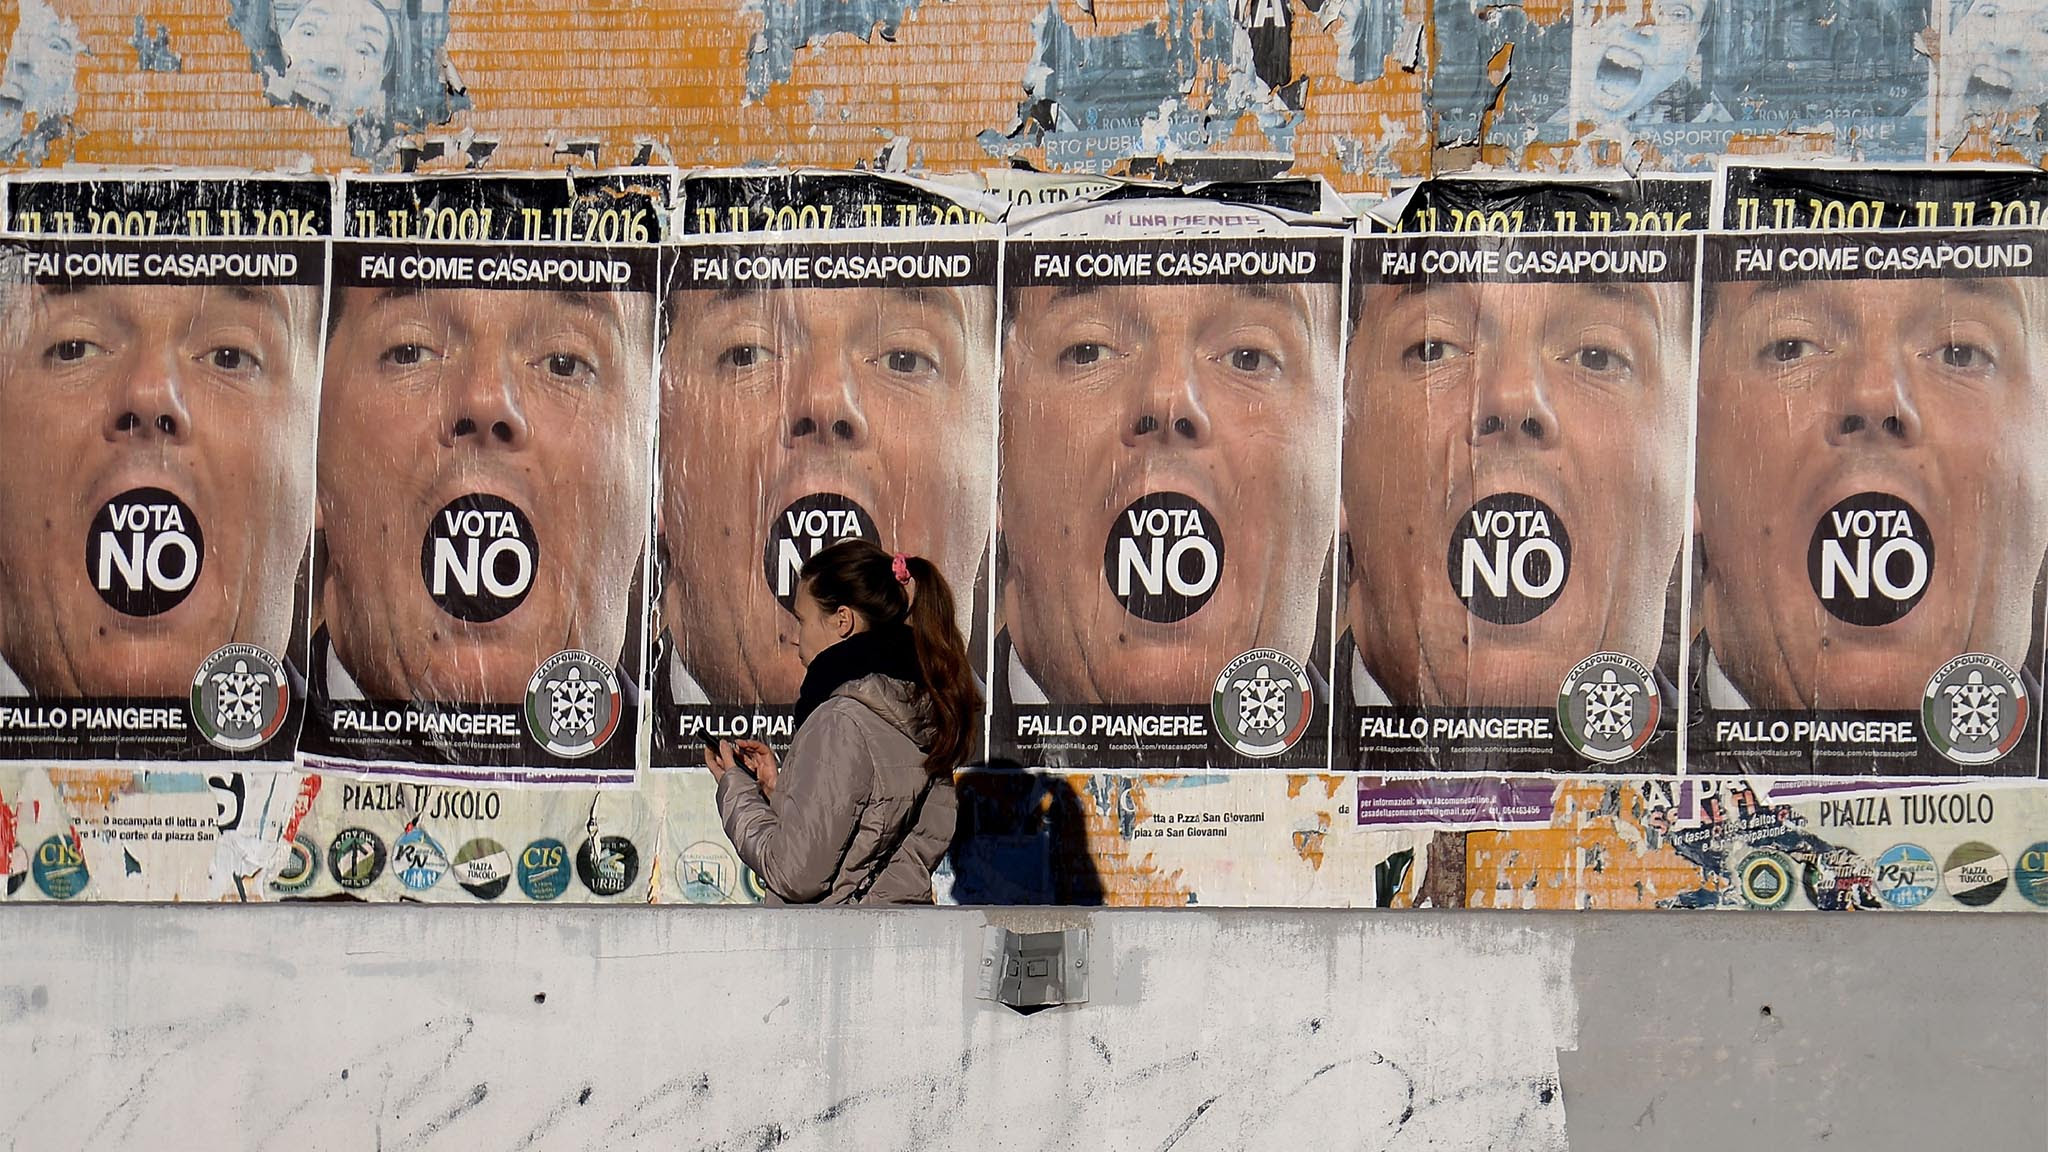 A woman walks past posters from the far-right political movement Casapound